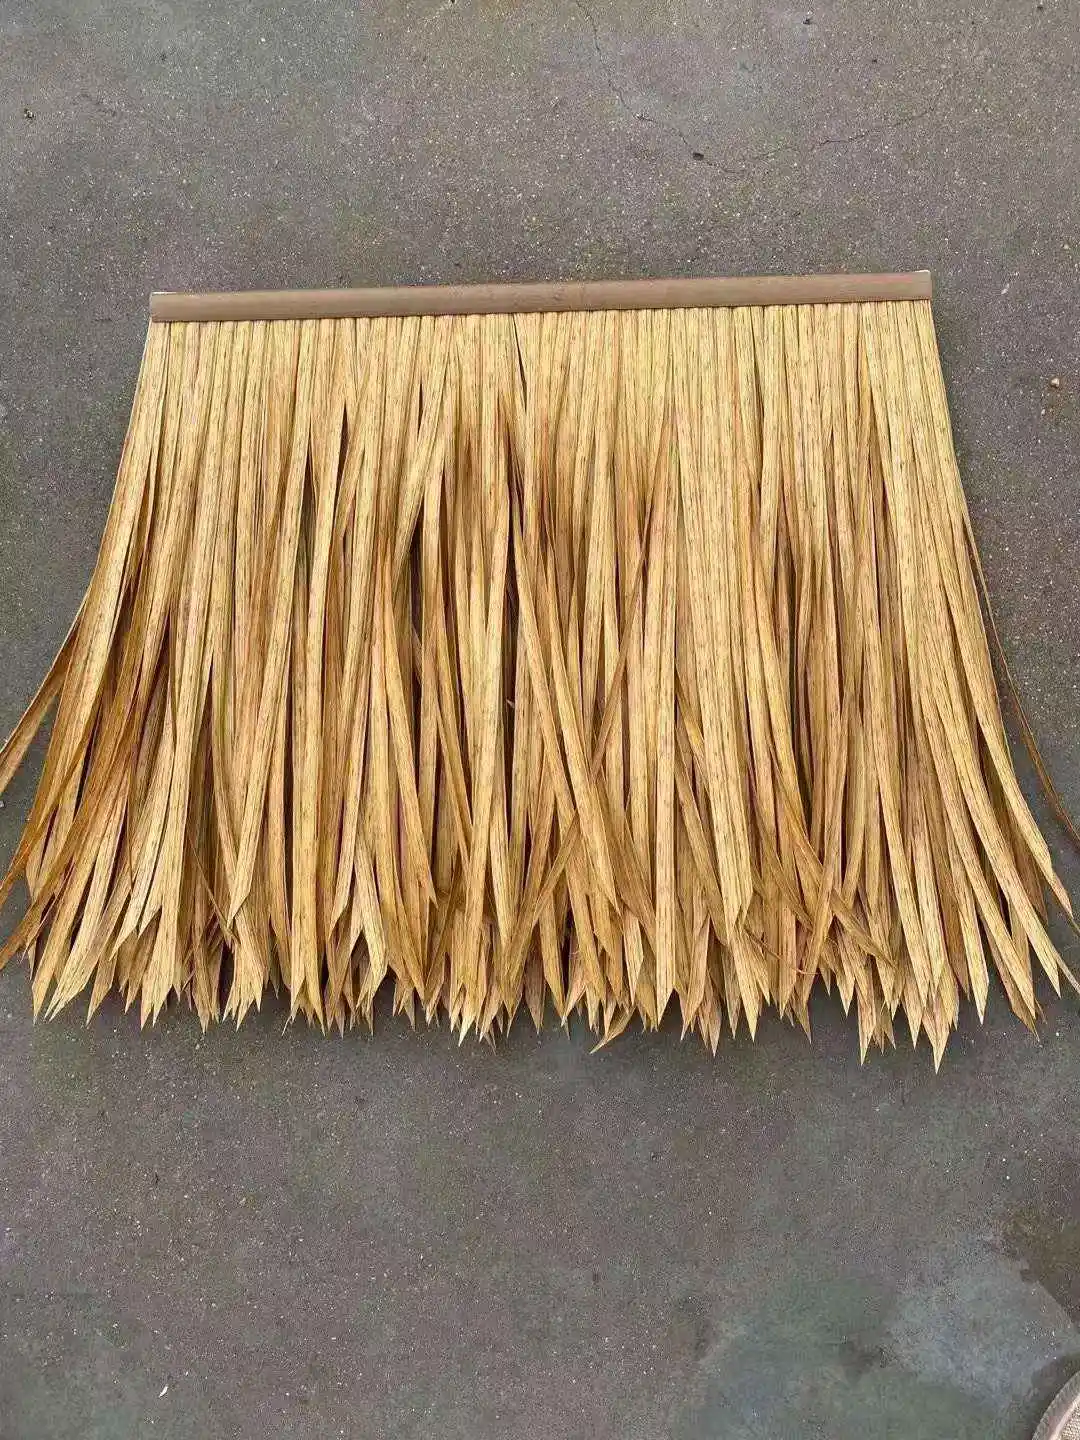 Inset Resistance Natural Looking Synthetic Thatch Roofing Plastic Thatch